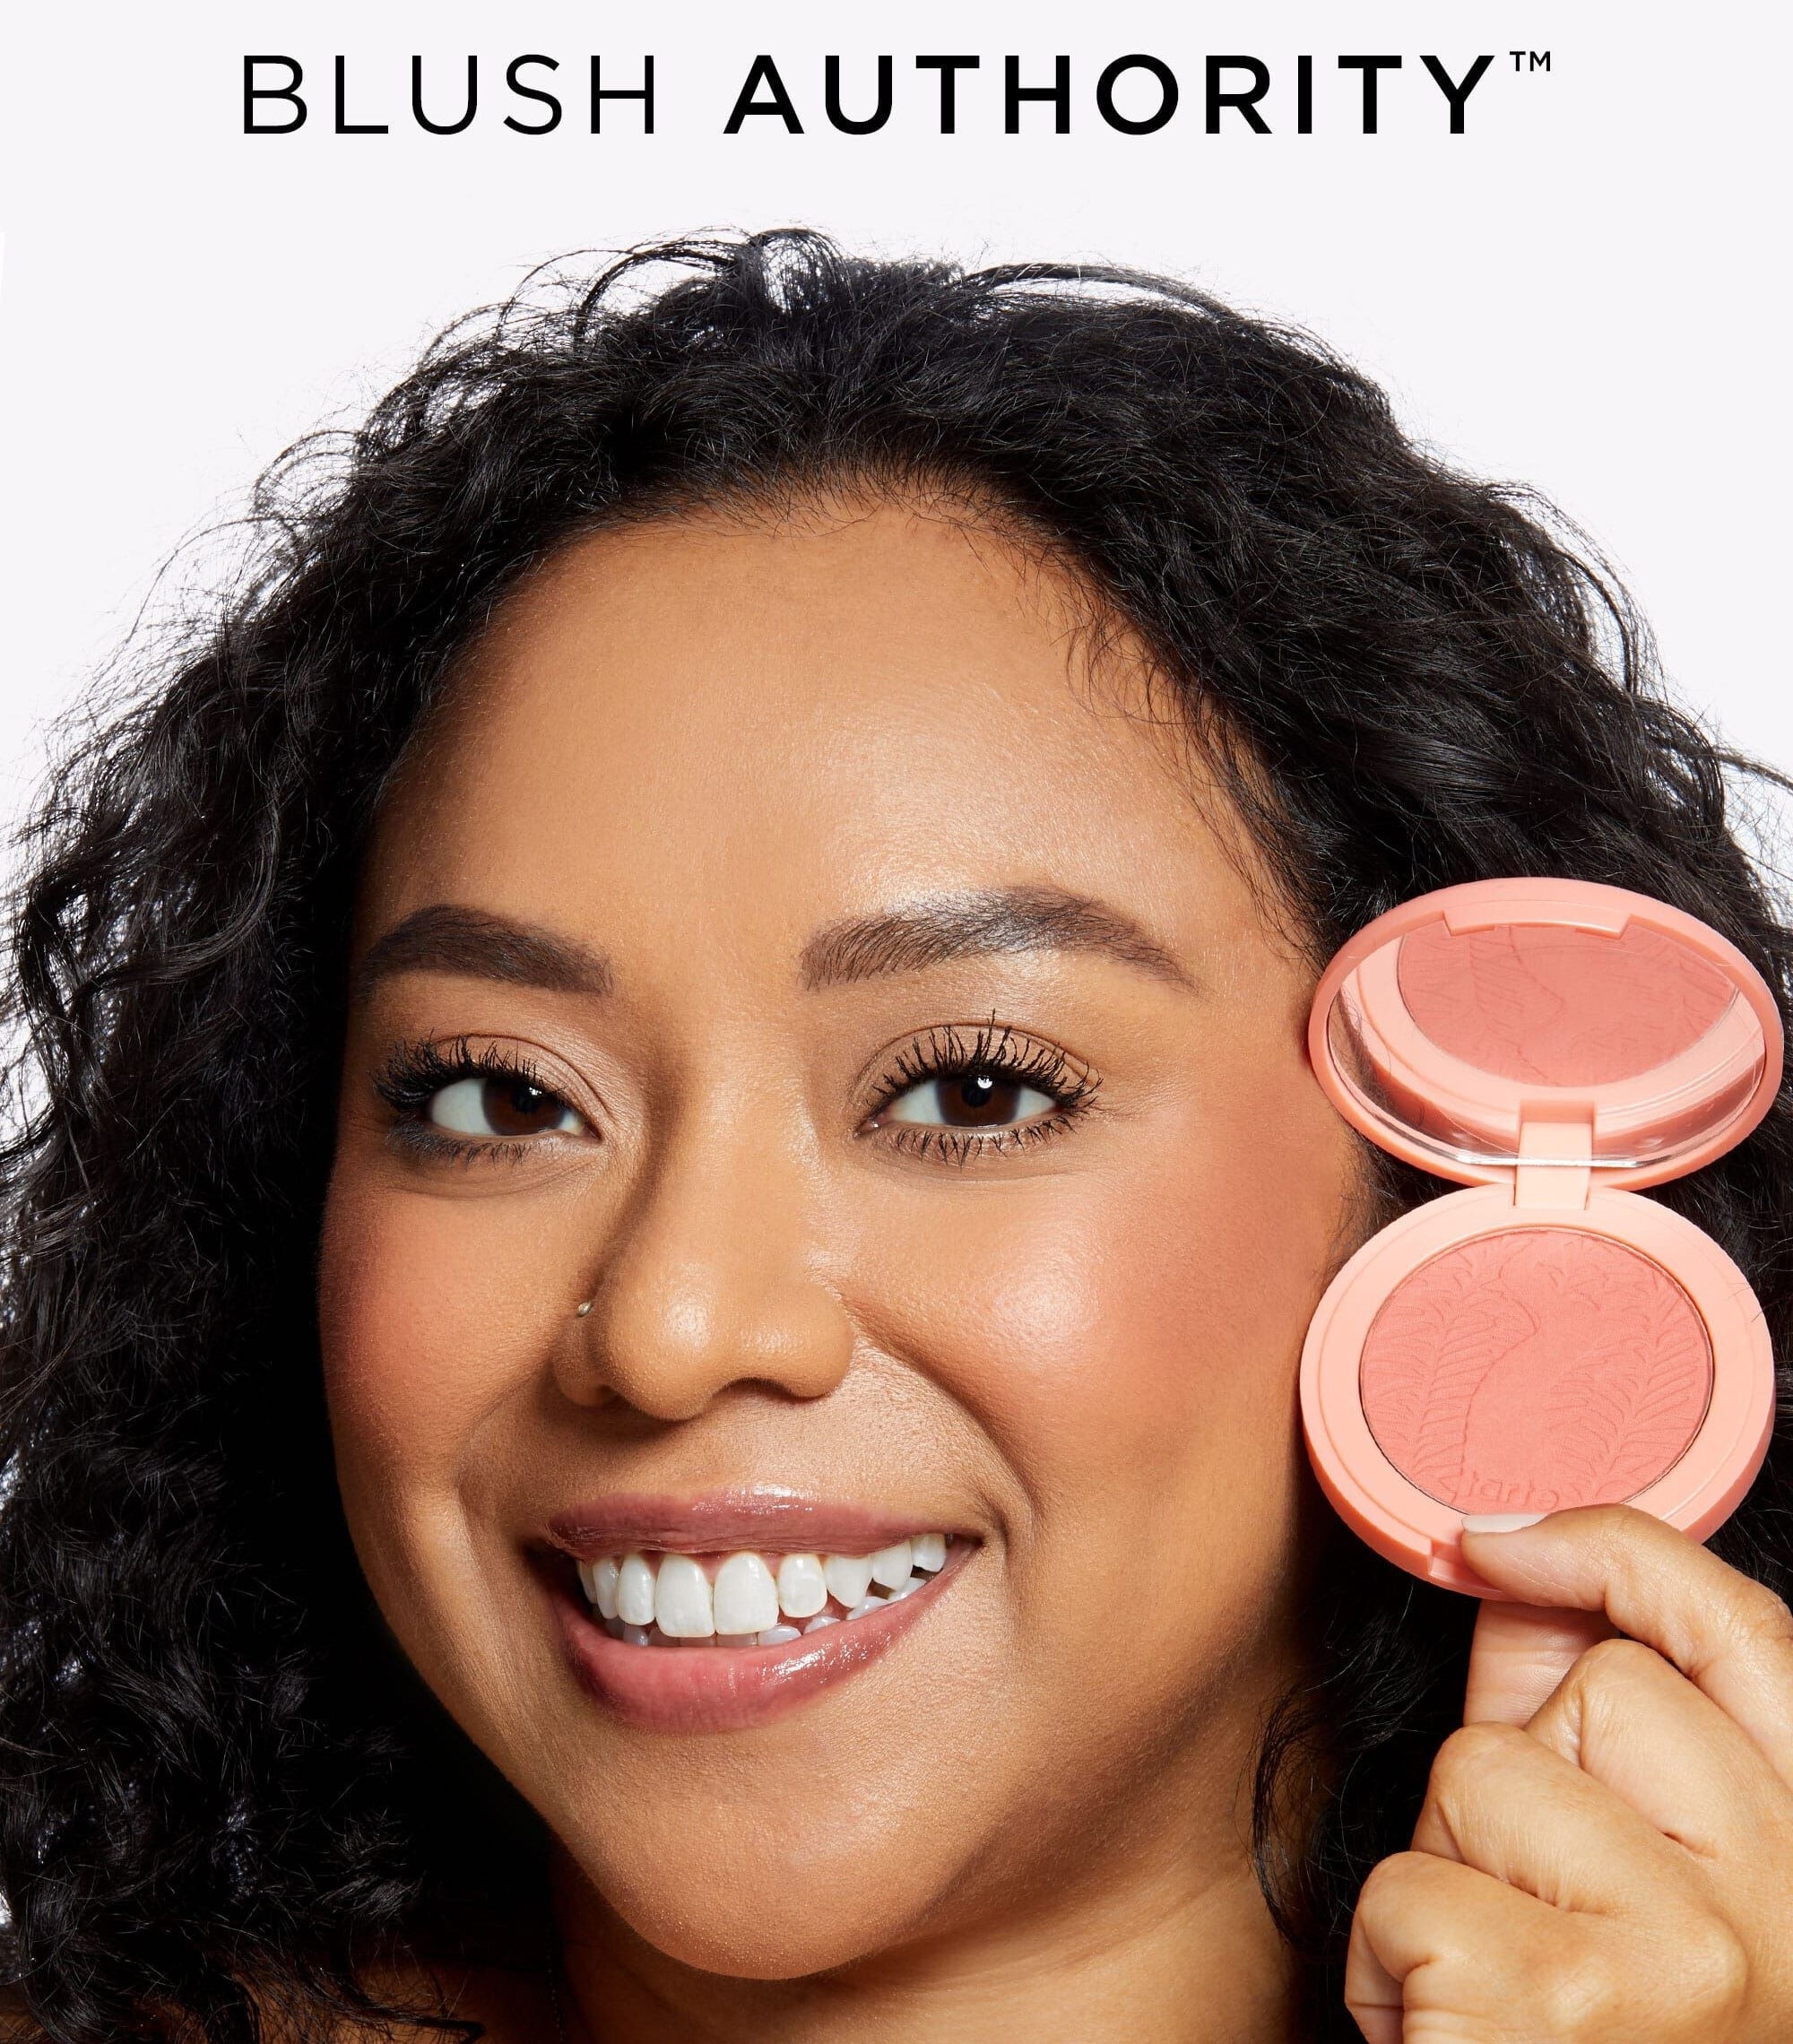 A model holding and wearing a Tarte Blush